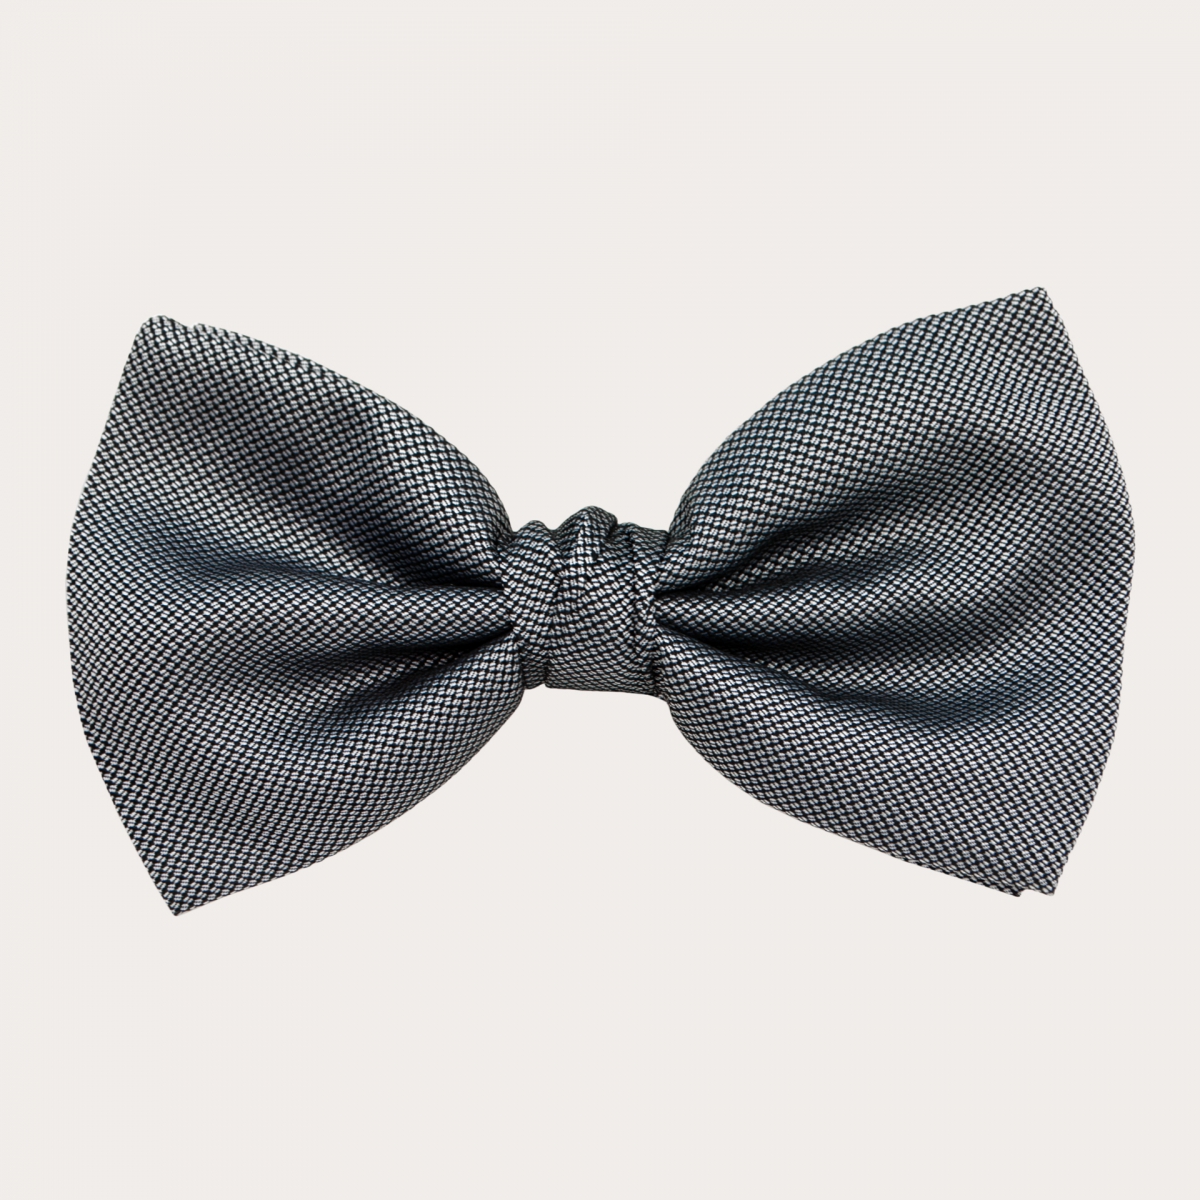 BRUCLE Complete set of thin suspenders, bow tie and pocket square, dotted grey silk